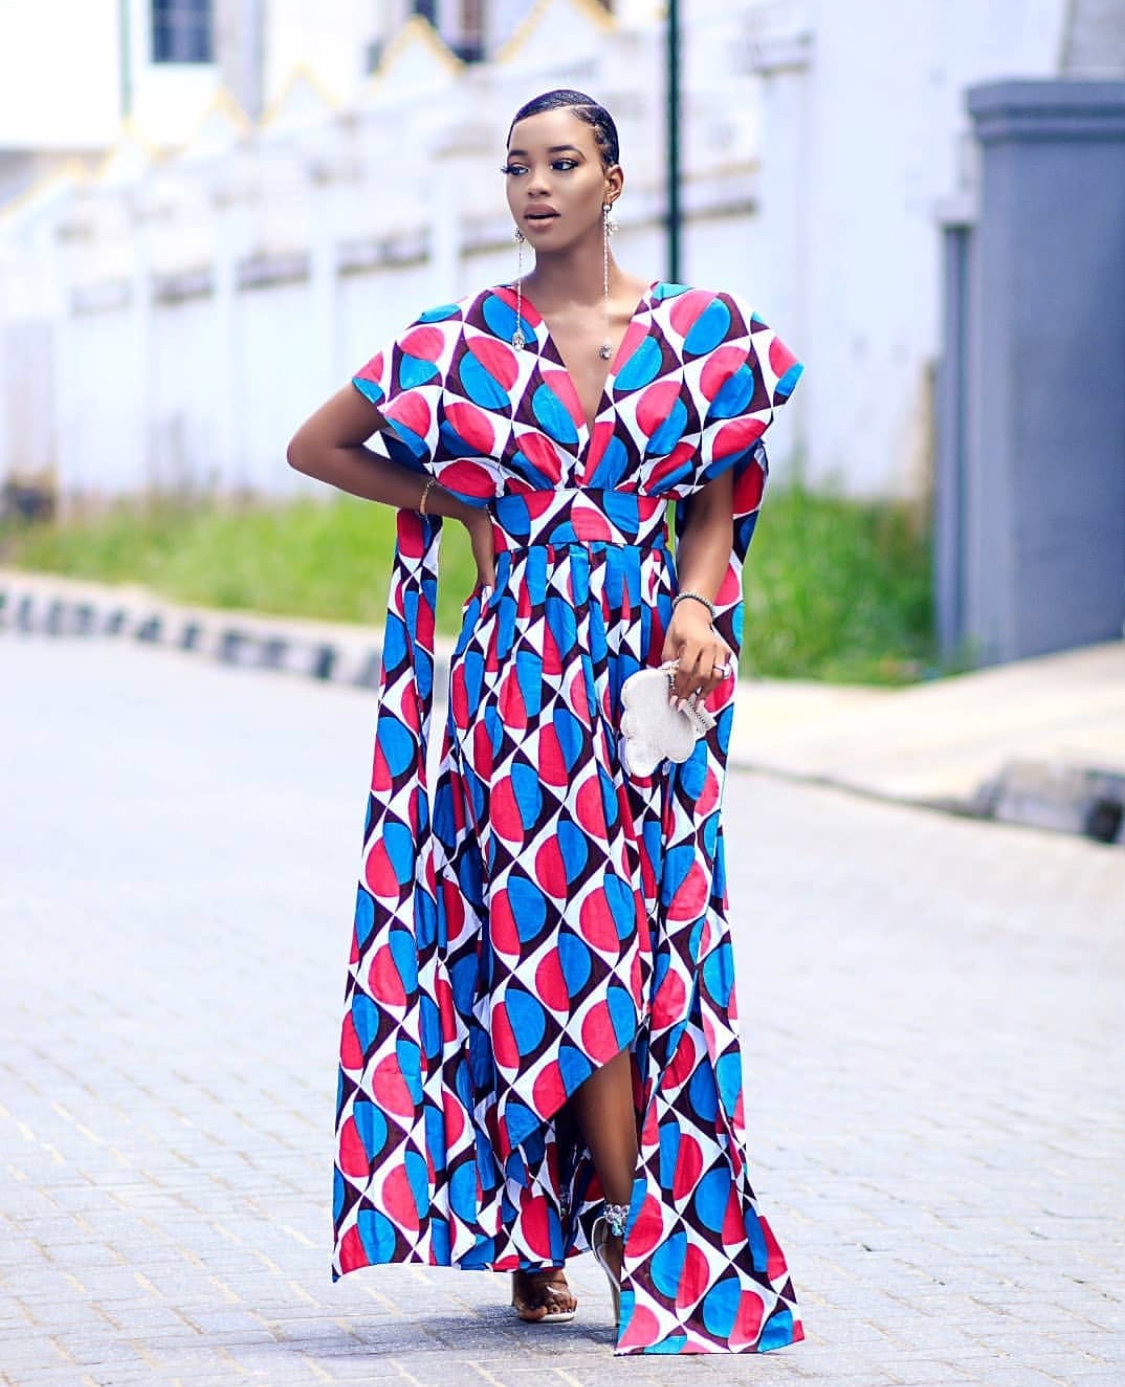 50+ best African print dresses | Looking for the best & latest African print dresses? From ankara Dutch wax, Kente, to Kitenge and Dashiki. All your favorite styles in one place (+find out where to get them. Click to see all!